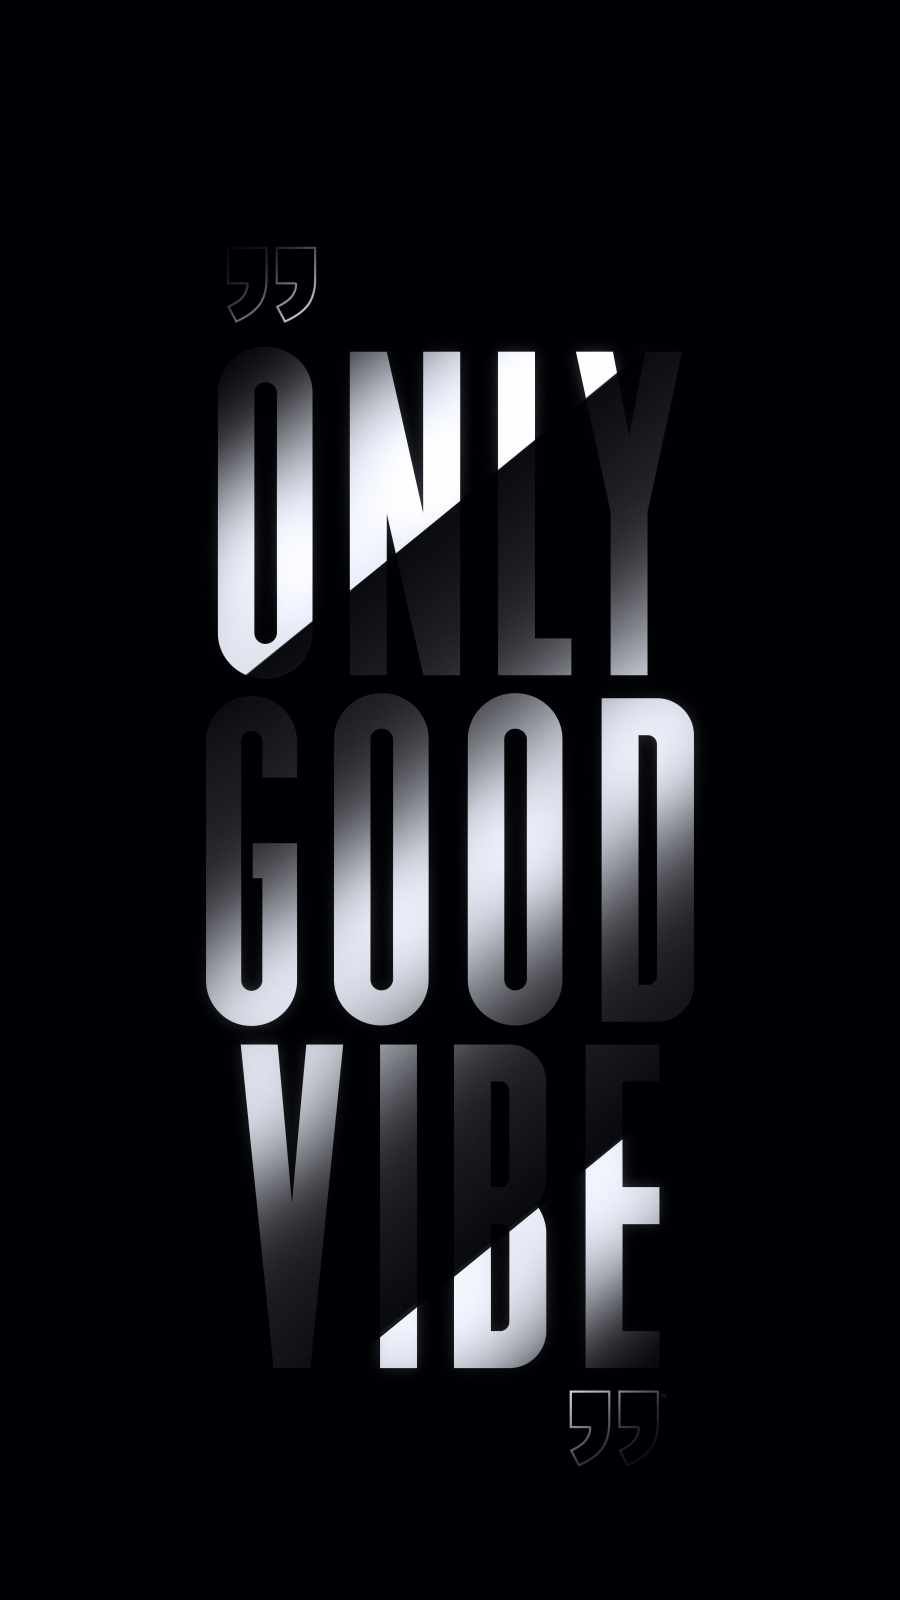 Good Vibes Only Wallpaper by FadedGlory20 on DeviantArt